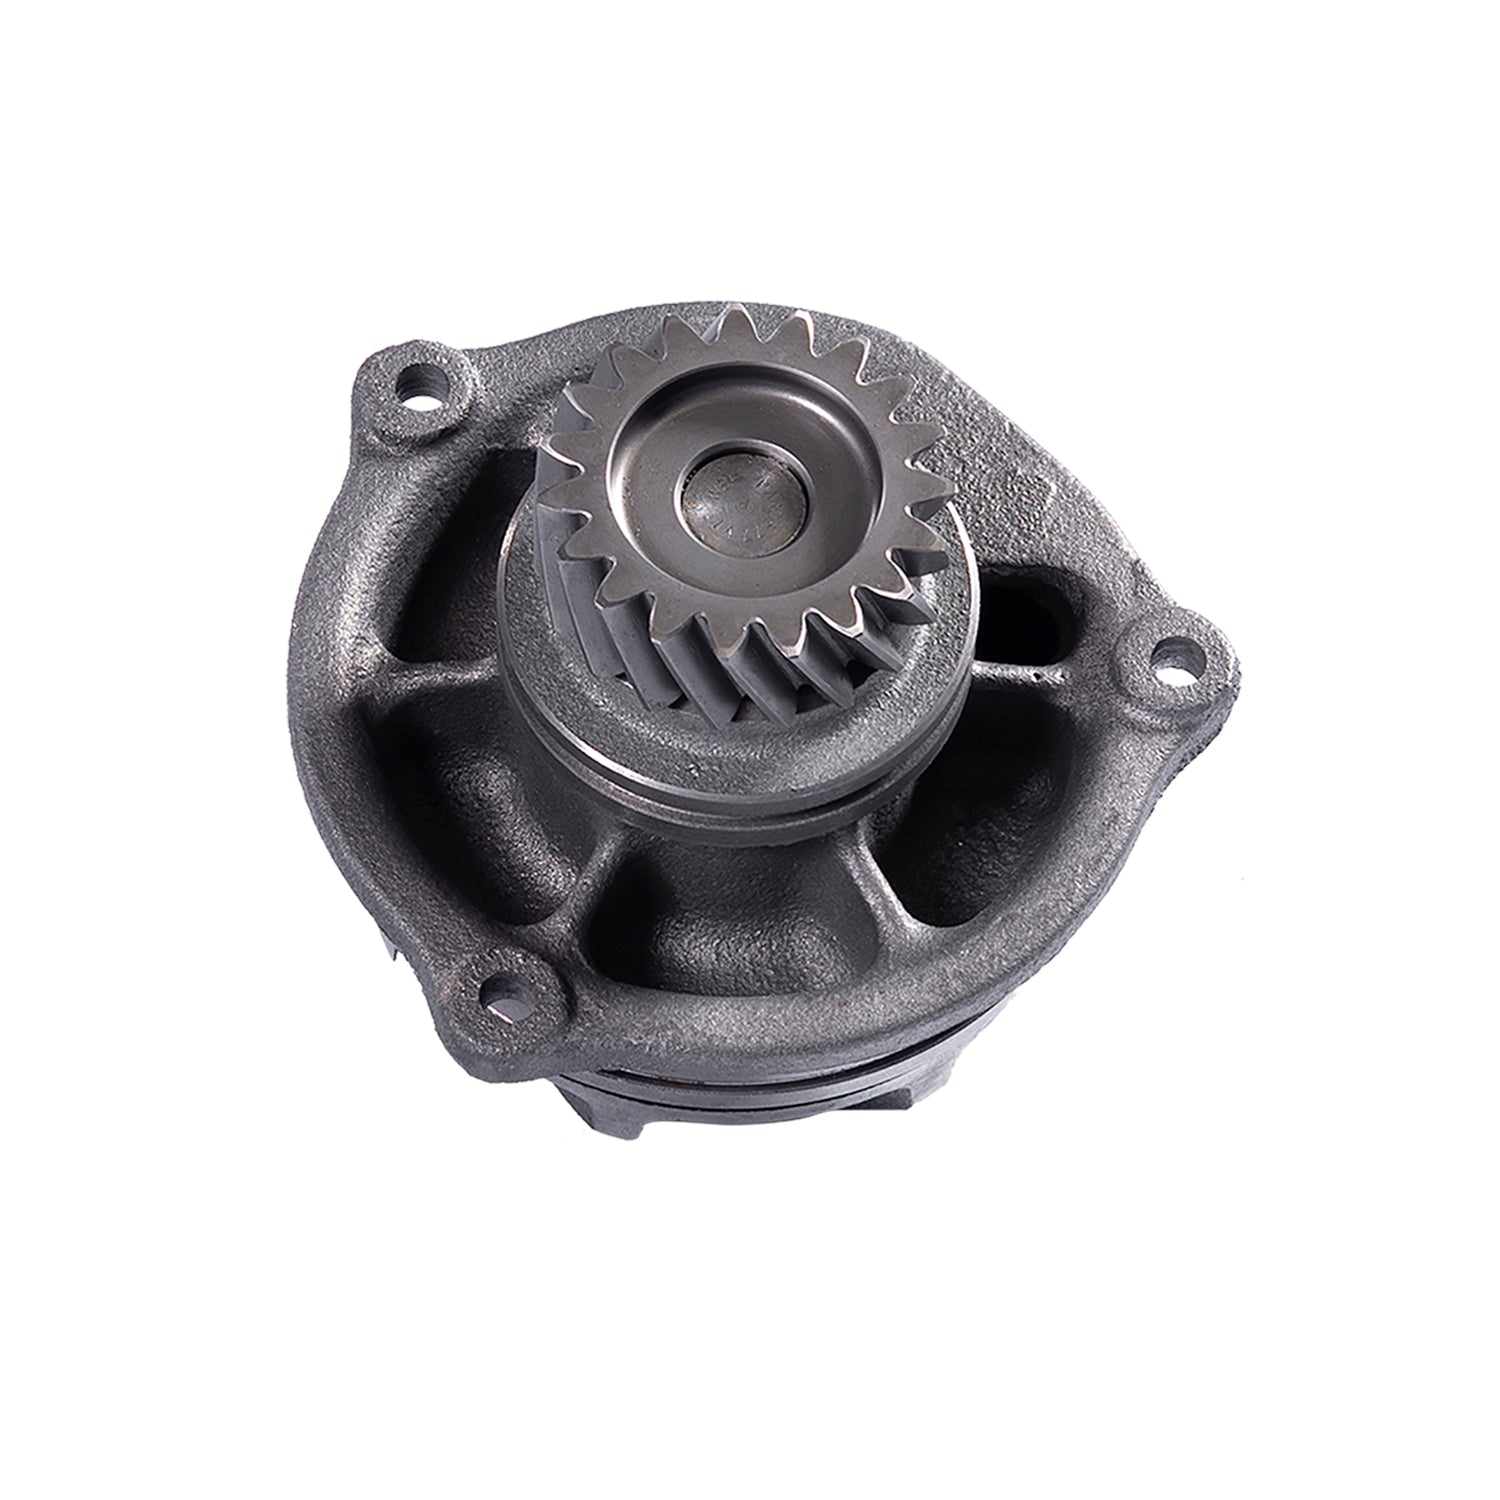 Water Pump Replacement for Iveco Truck; EUROSTAR, EUROTECH 450E37T 500350785